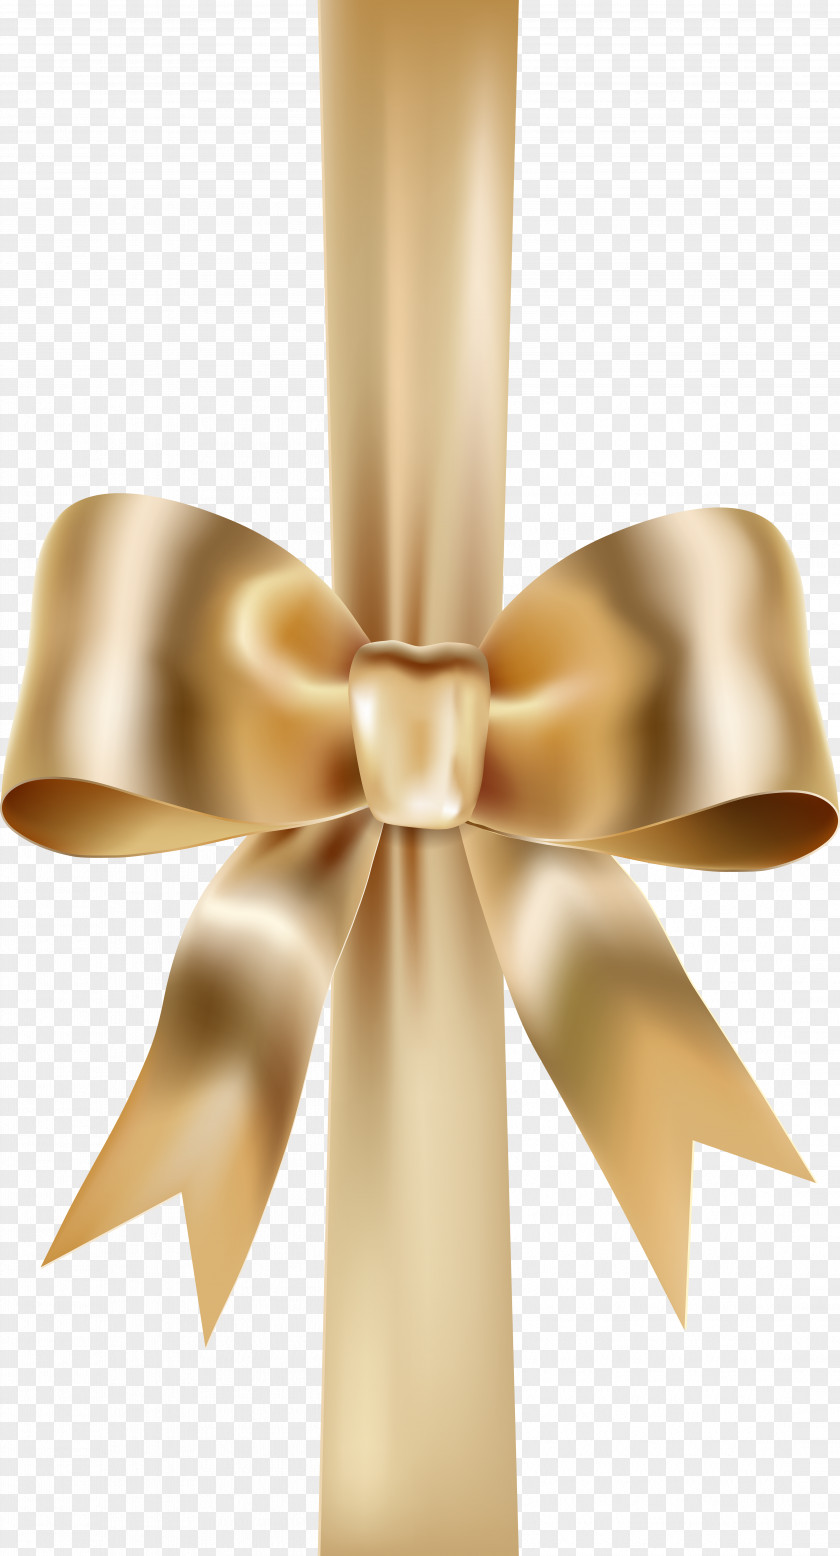 Elegant Bow With Ribbon Clip Art And Arrow Icon Computer File PNG